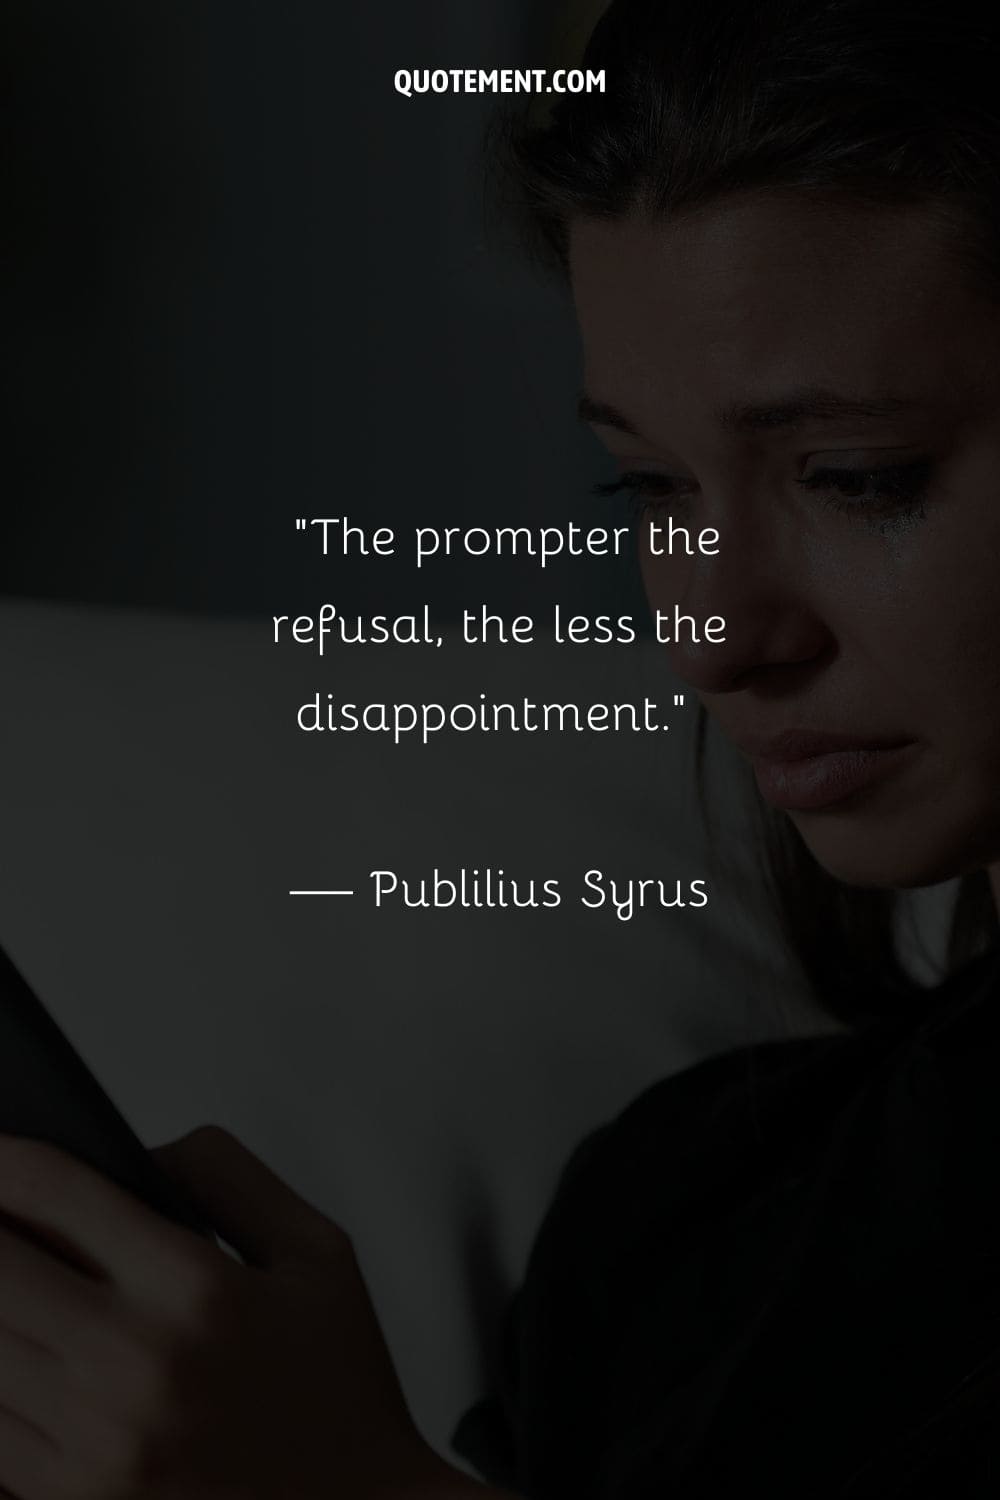 The prompter the refusal, the less the disappointment